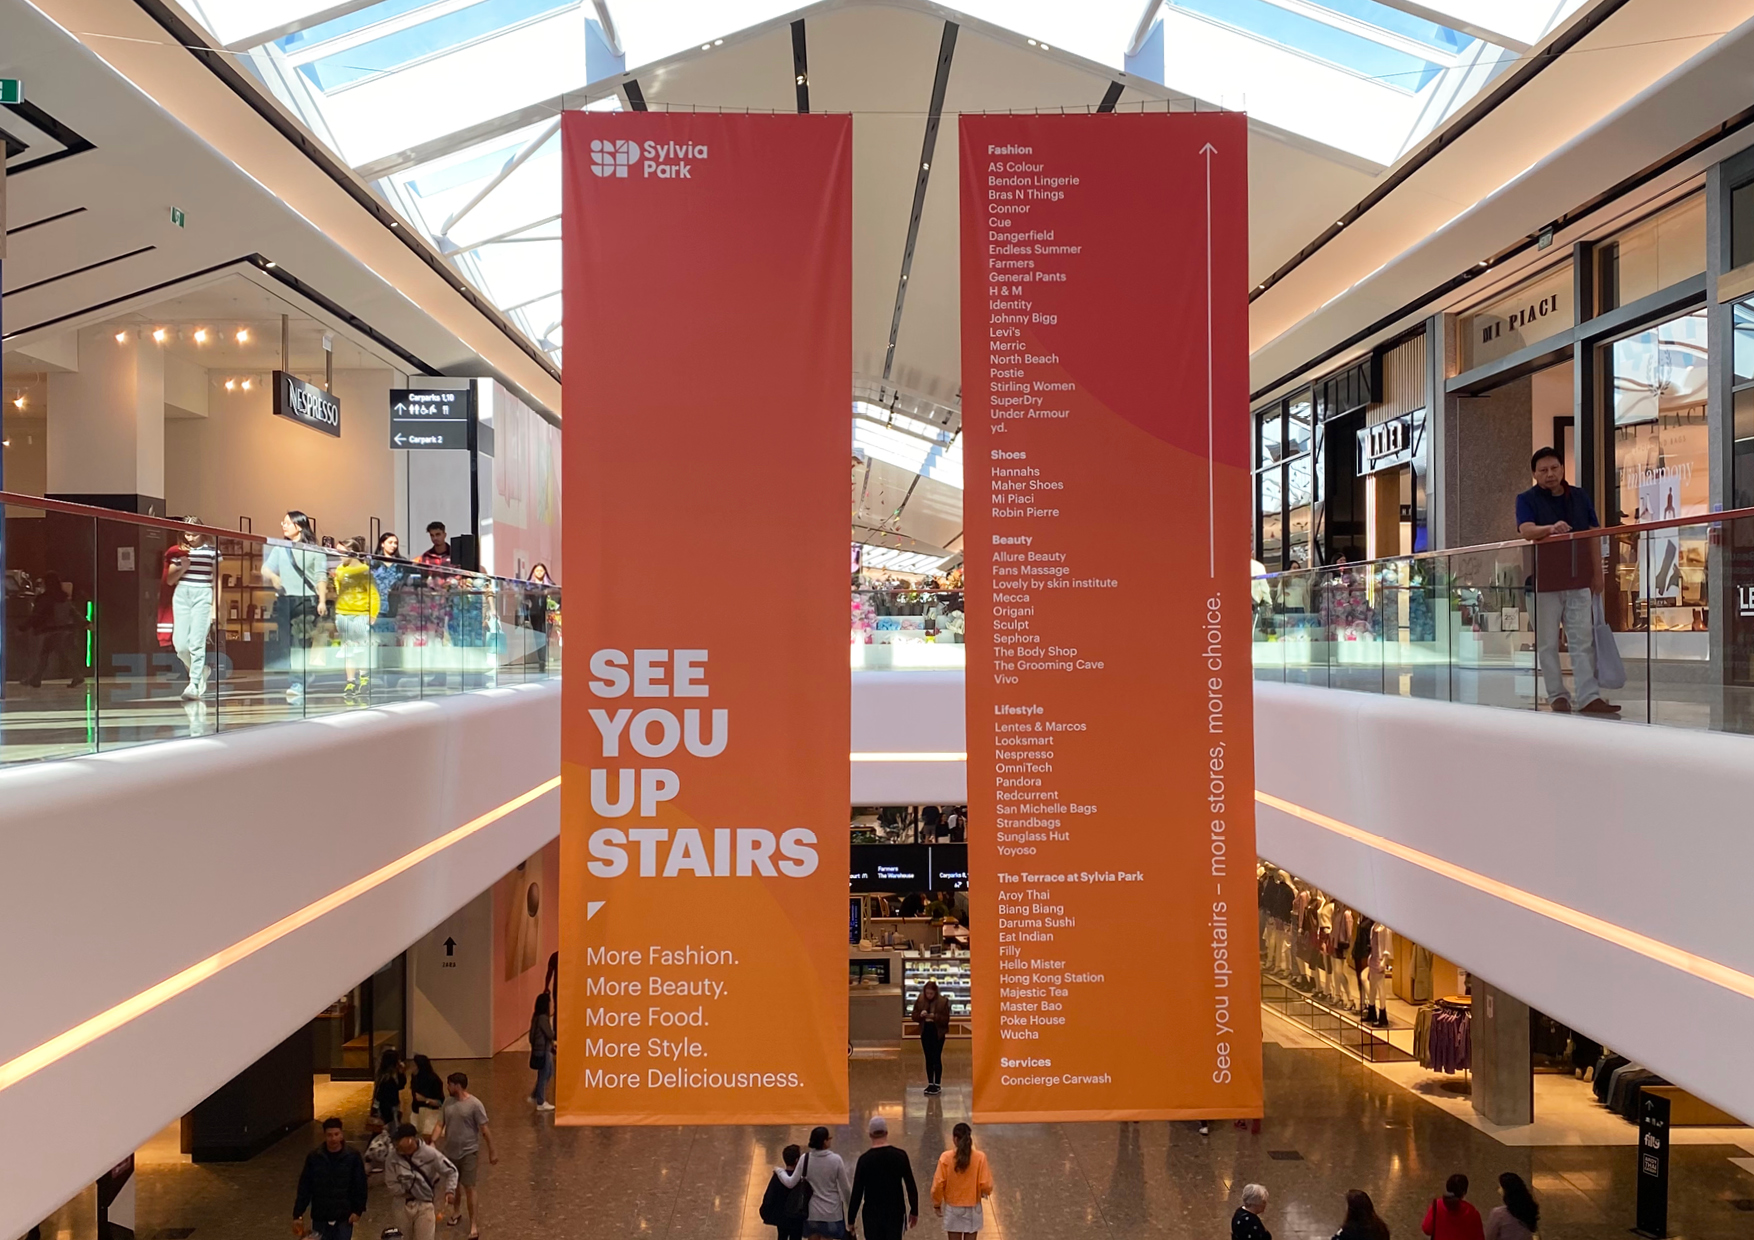 Large scale hanging Banners designed to capture shoppers' attention to drive foot traffic to new Level 1 retail at Sylvia Park , New Zealand's largest shopping mall